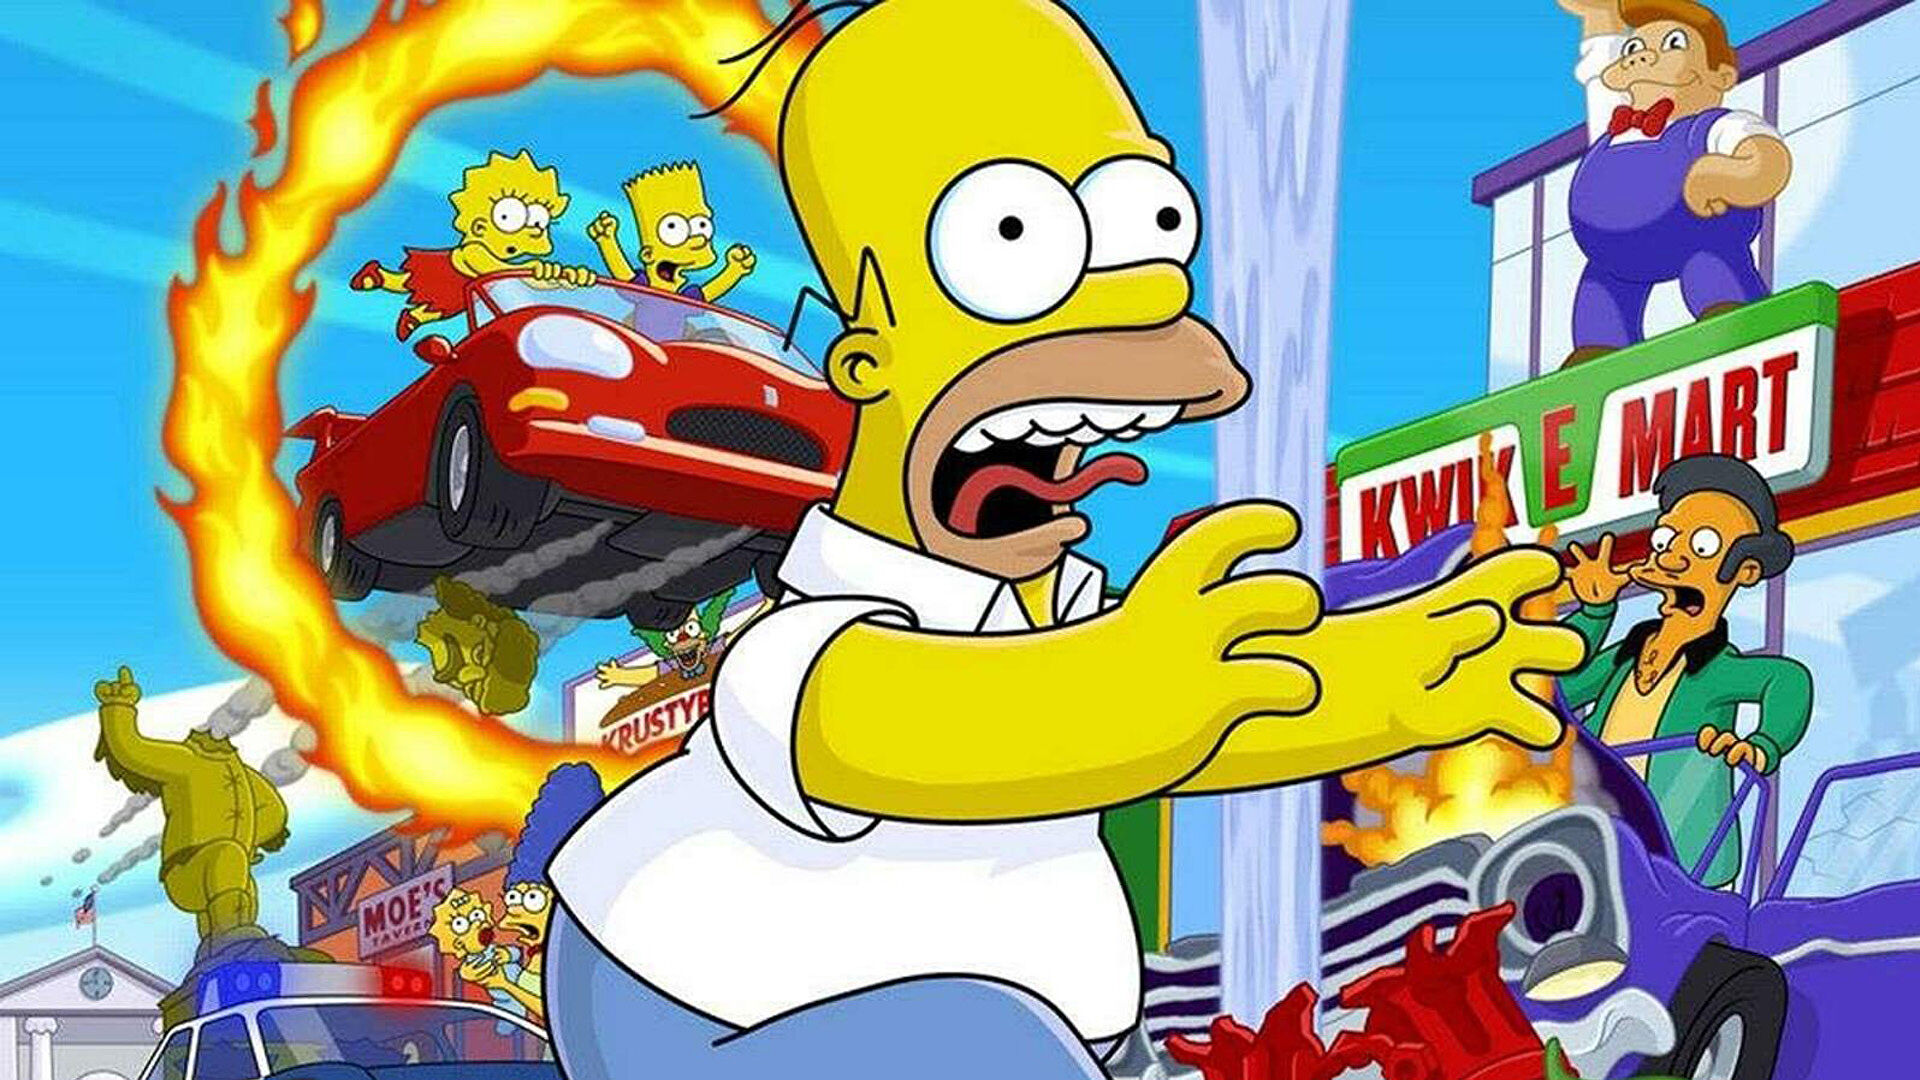 You can’t play The Simpsons: Hit & Run on modern platforms, but you can listen to its soundtrack